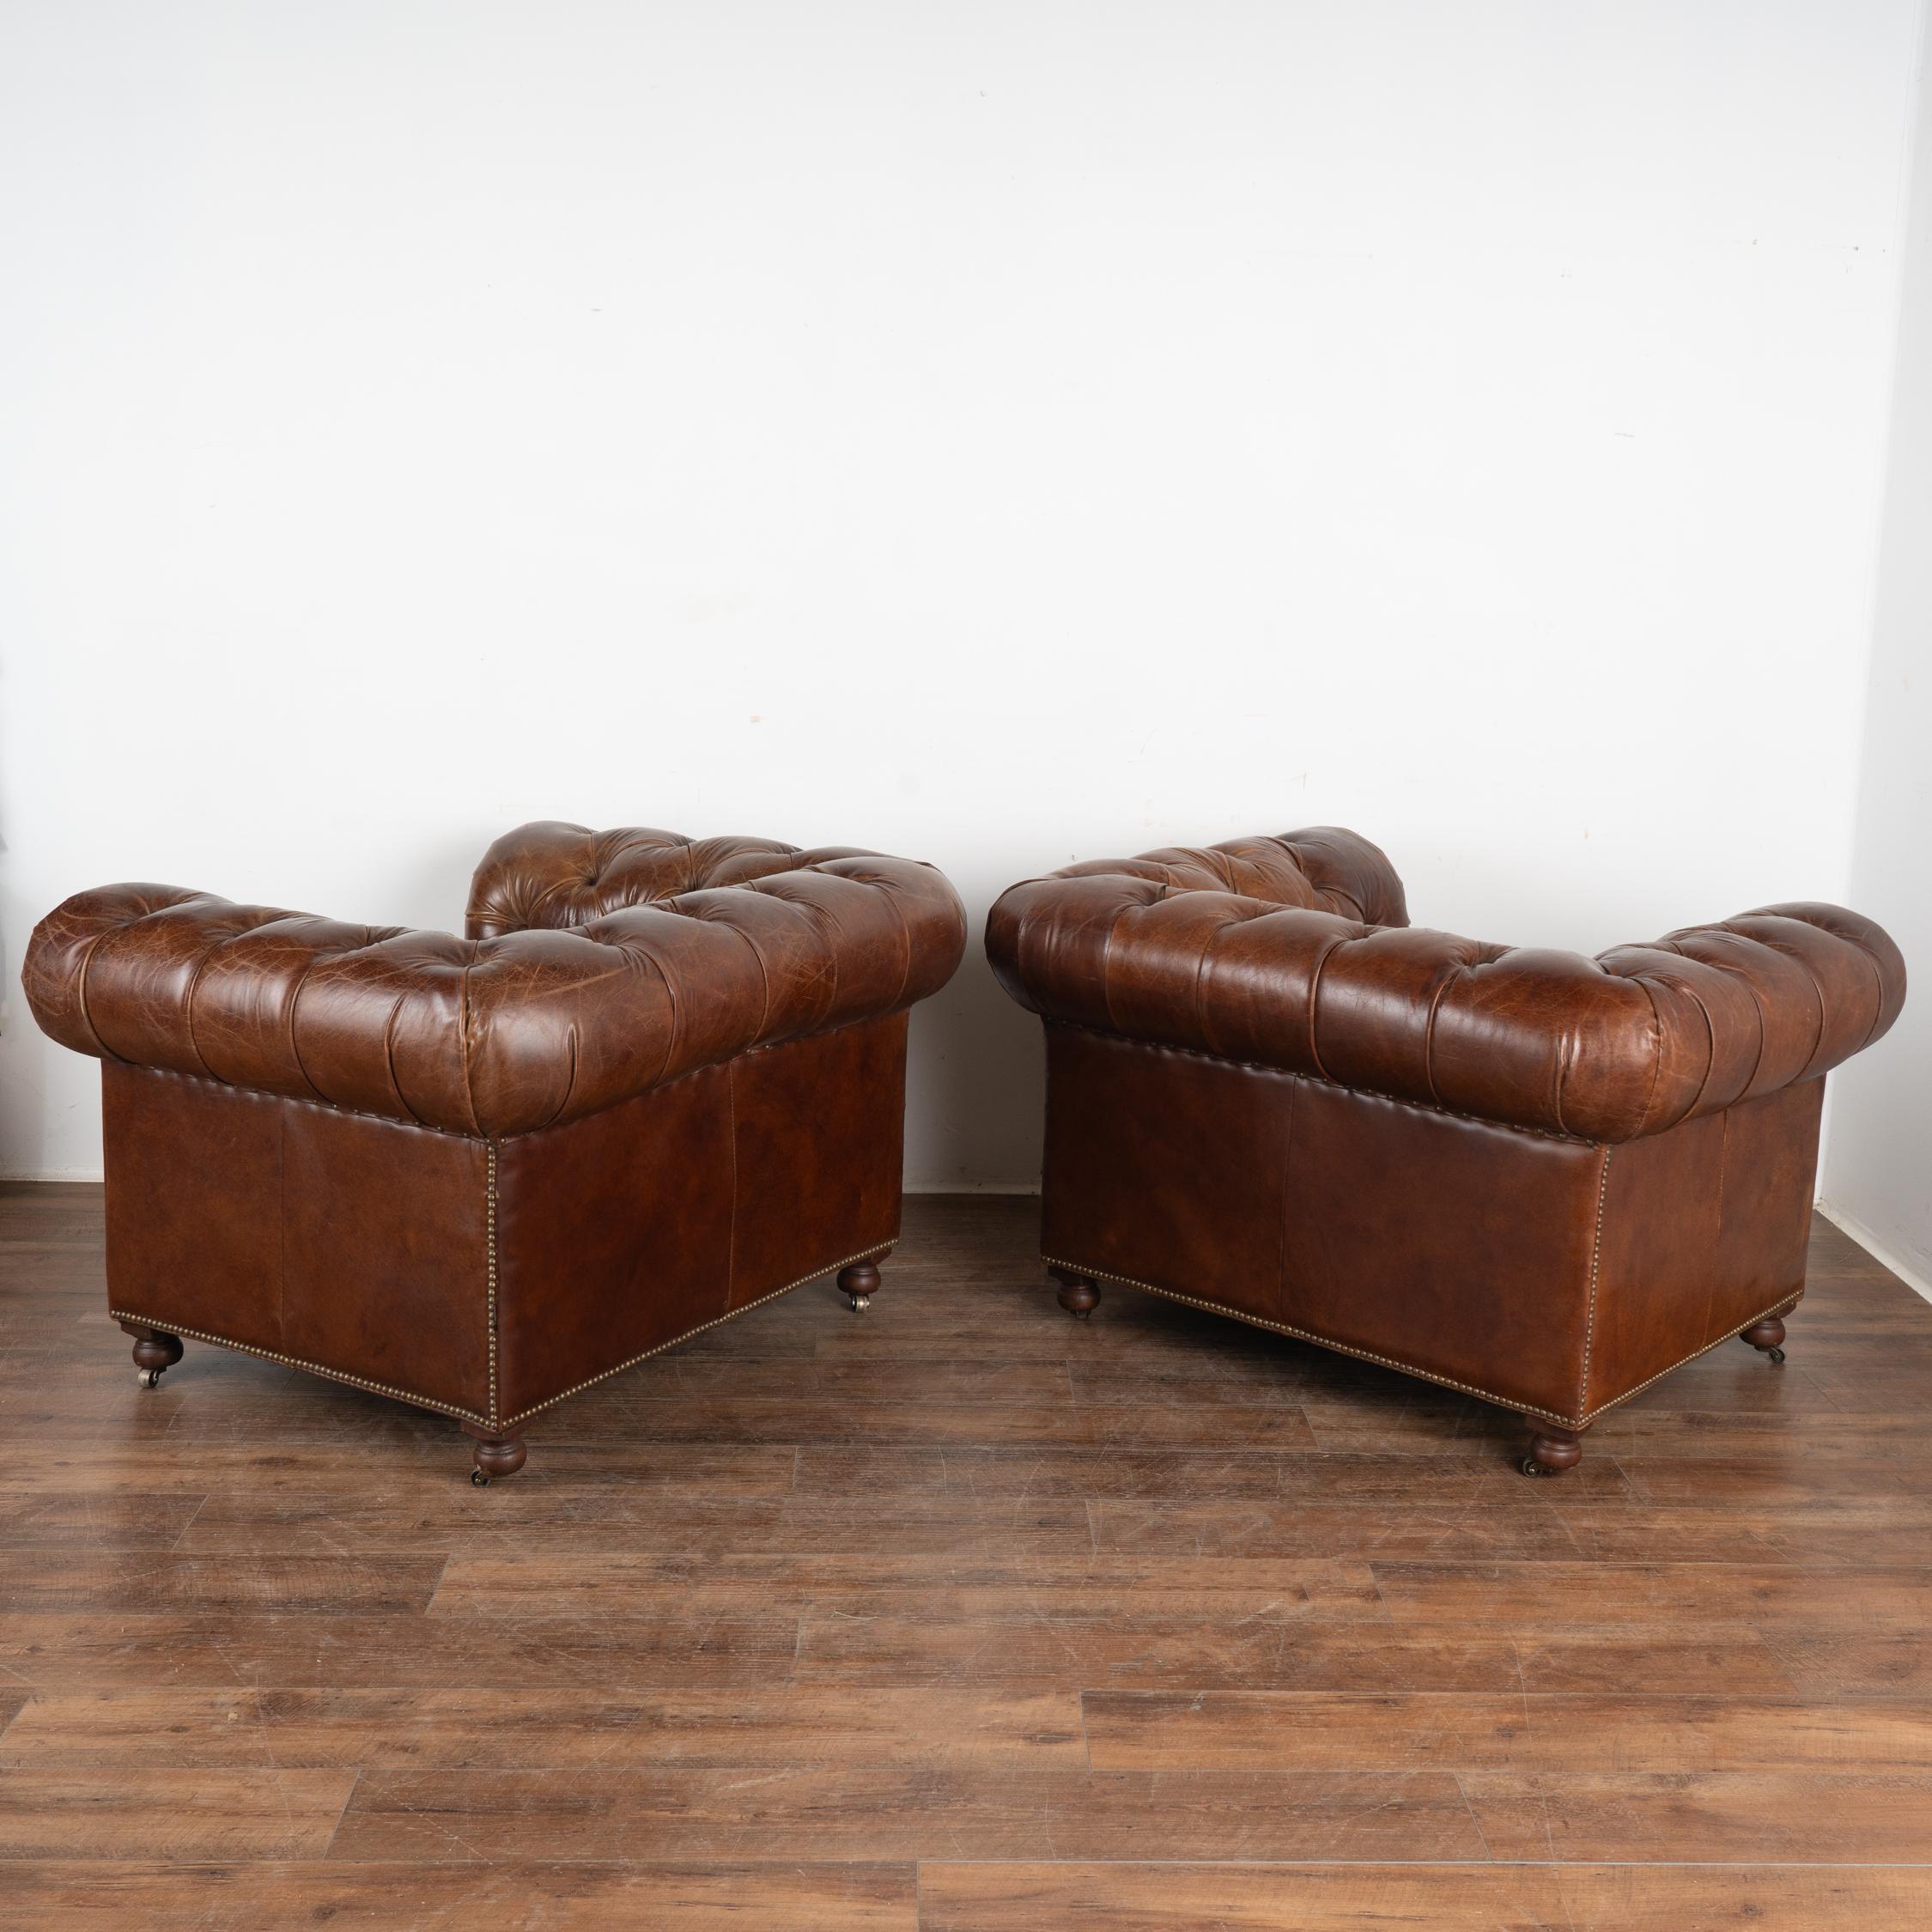 Pair, Vintage Brown Leather Chesterfield Club Arm Chairs, England circa 1970-80 5